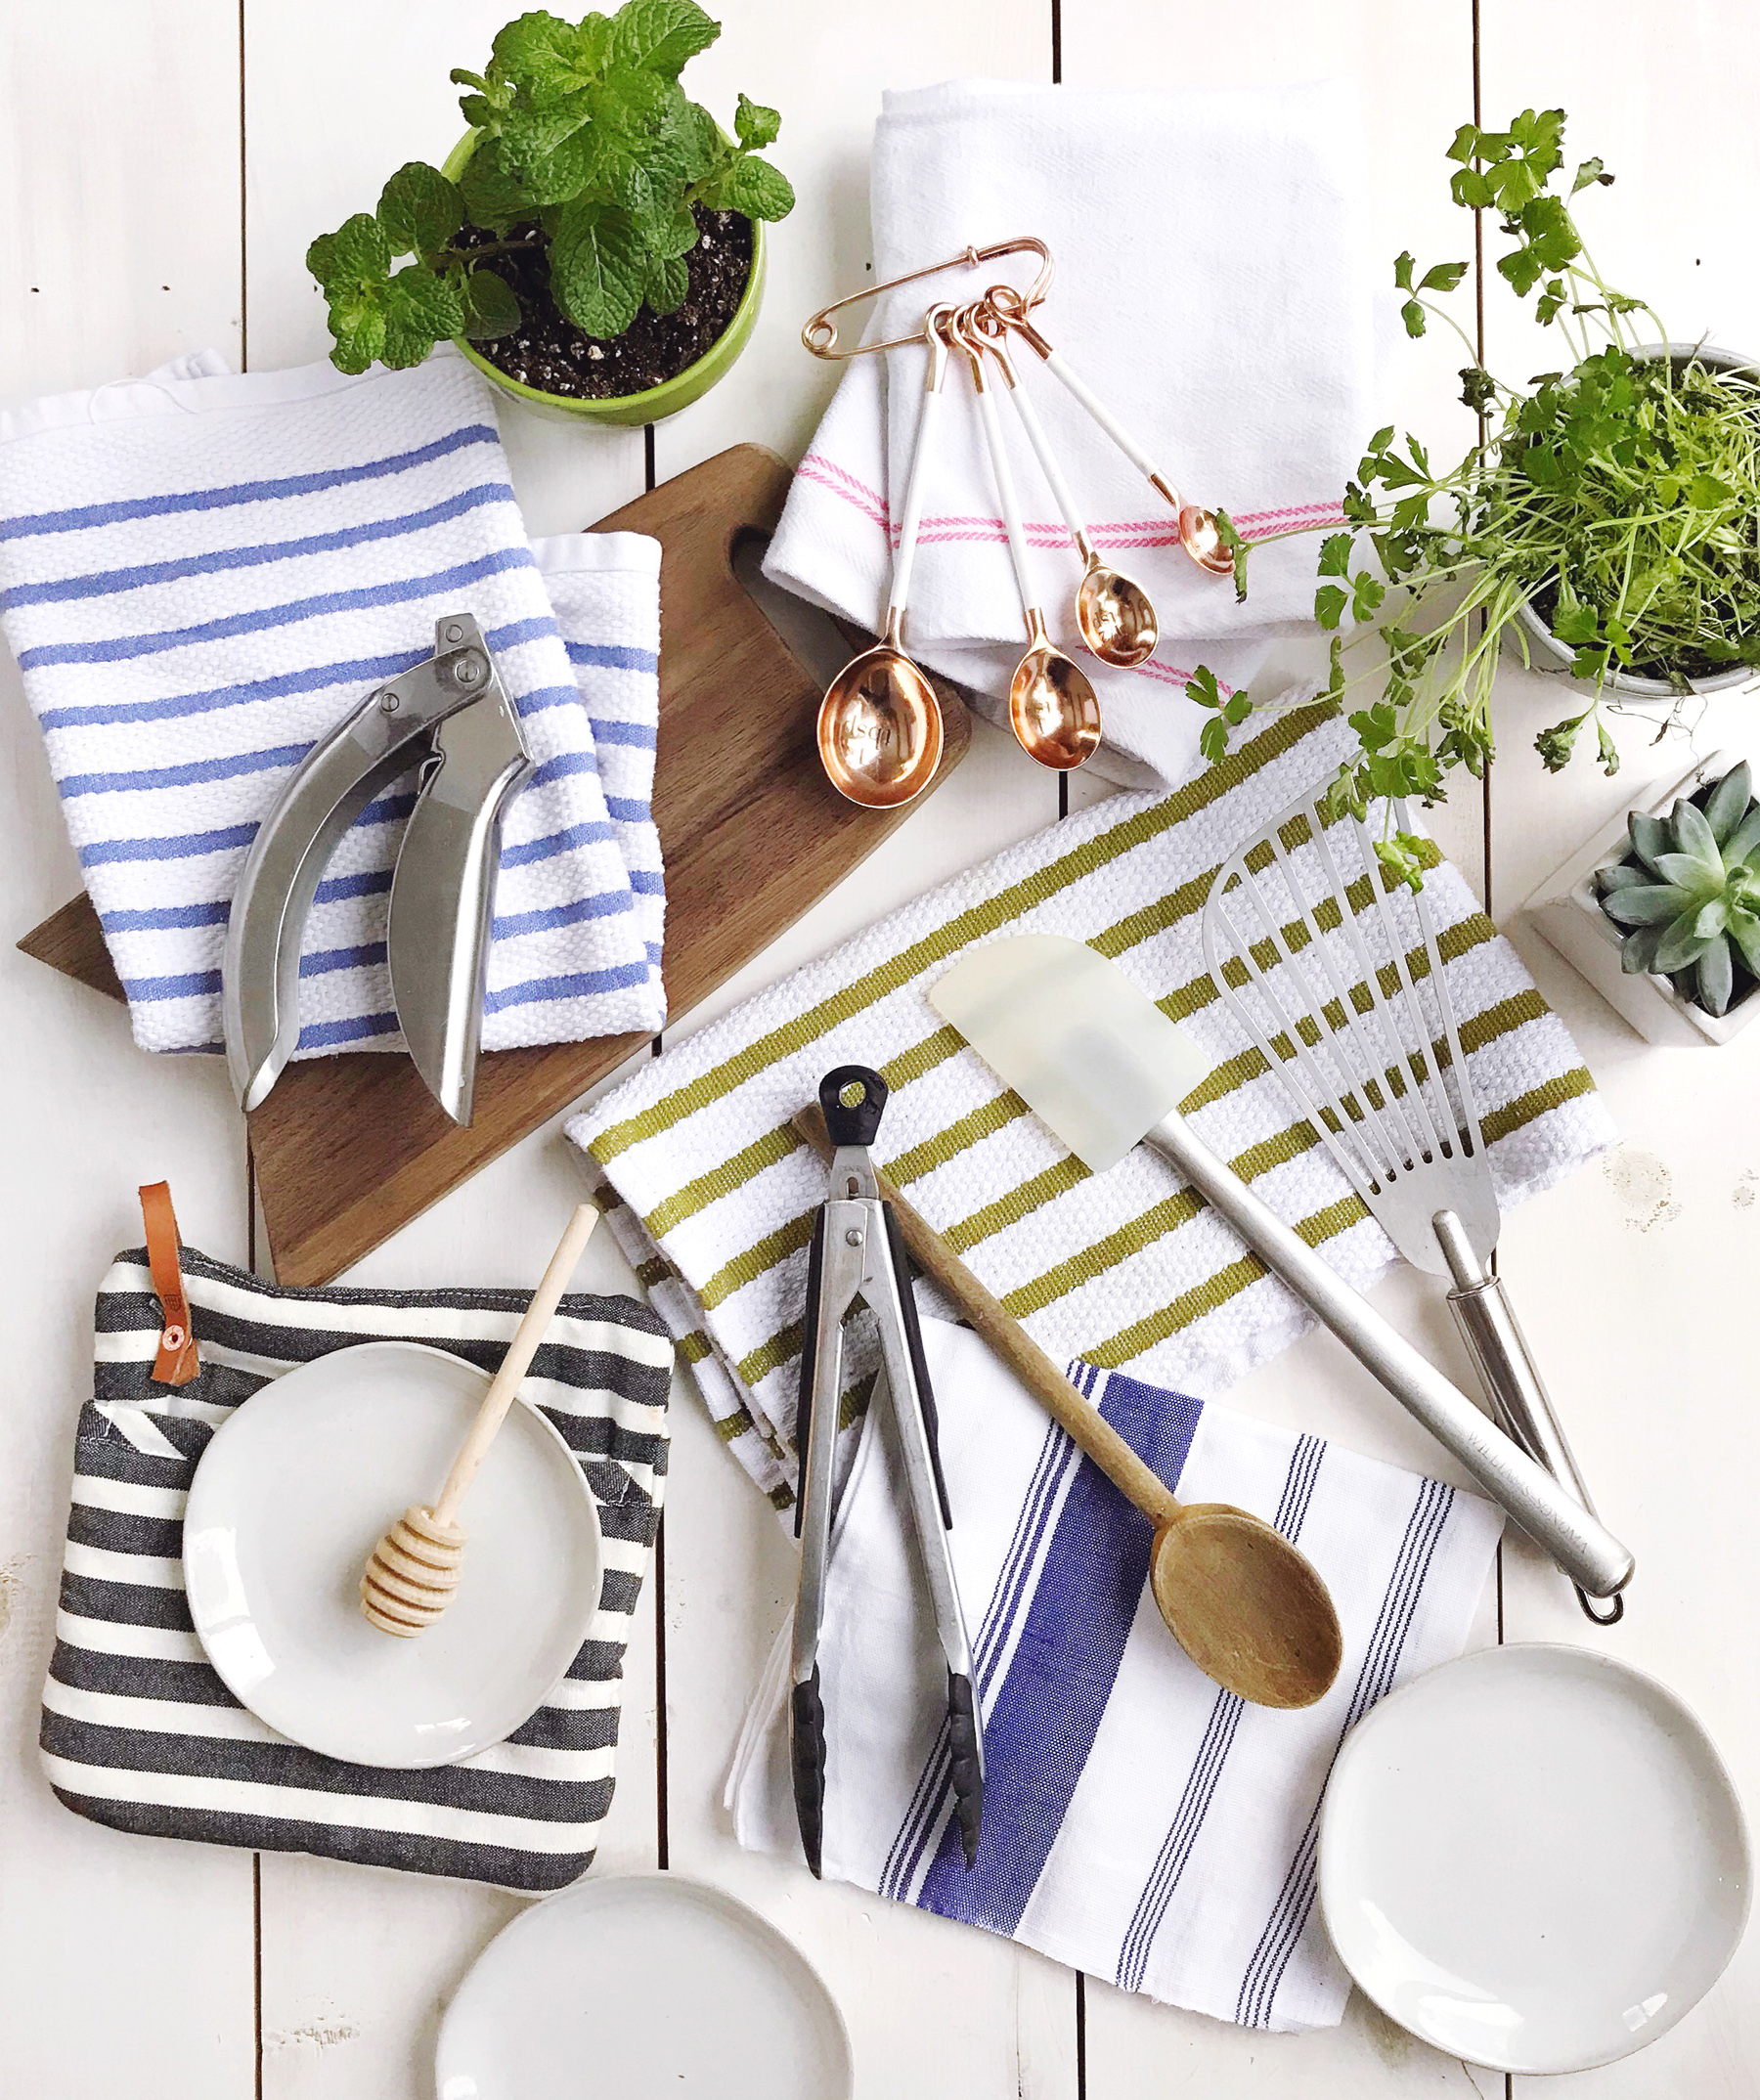 11 Kitchen Tools That Are Too Much Fun to Pass Up